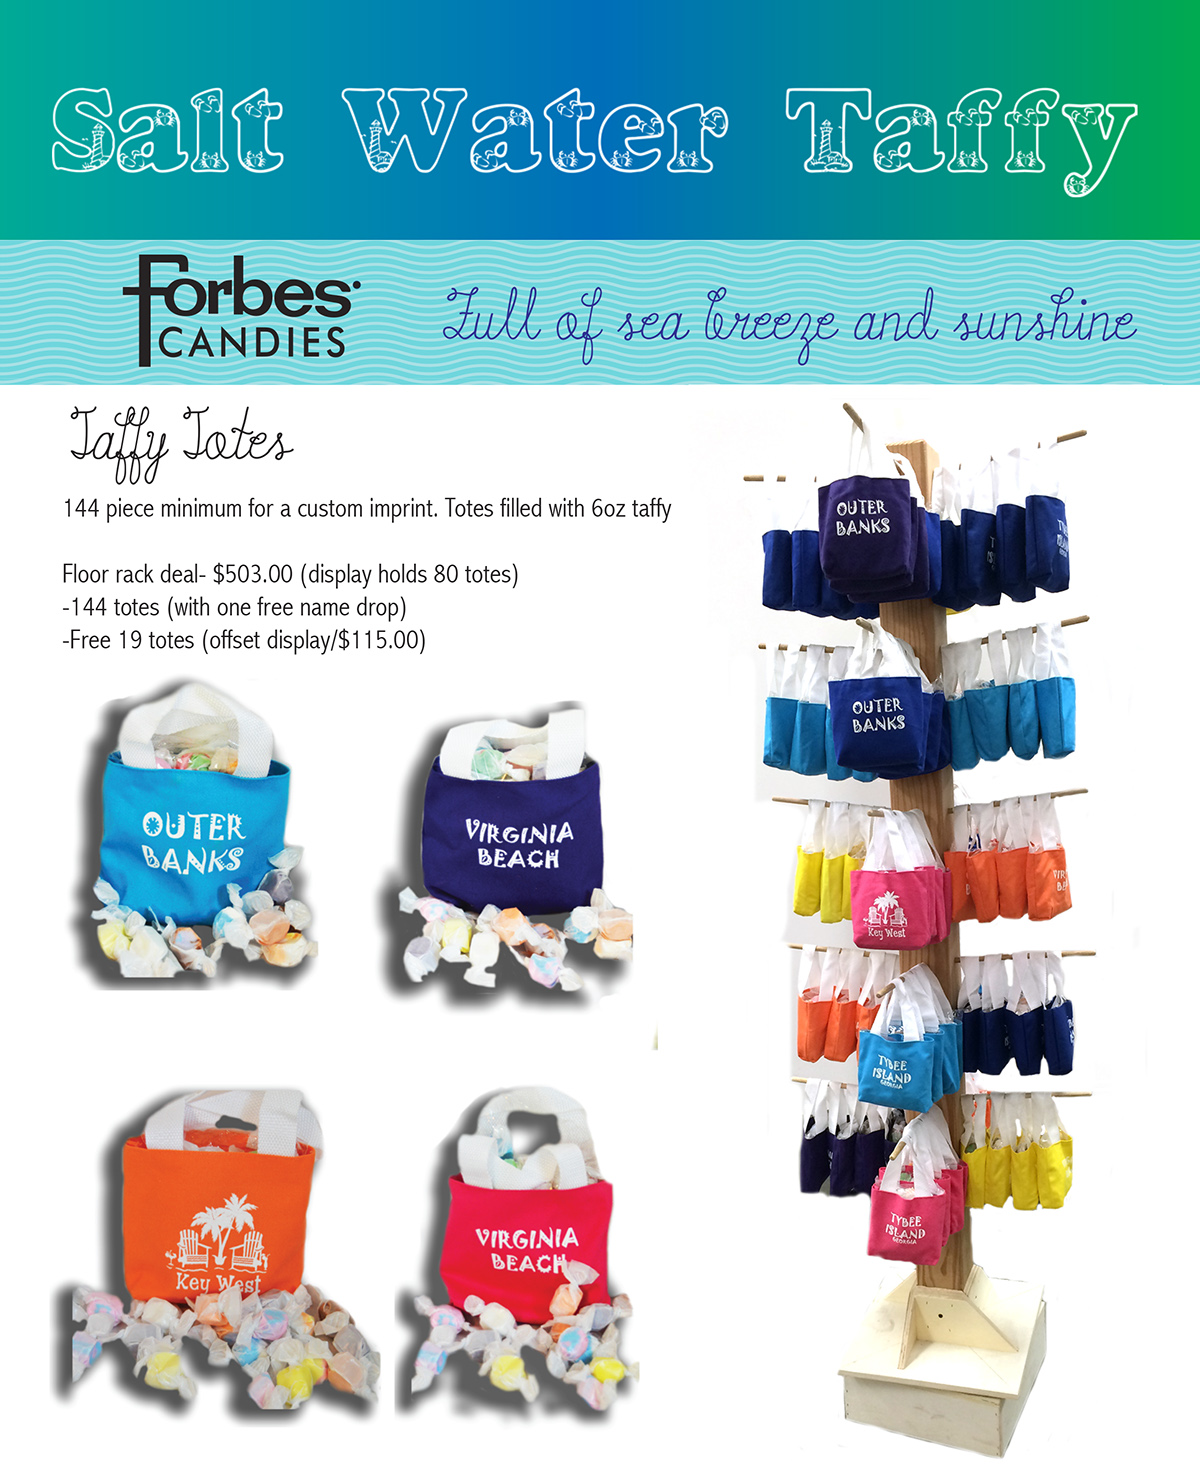 Forbes Candy marketing materials creative ad design Multimedia  beach manufacturing wholesale taffy